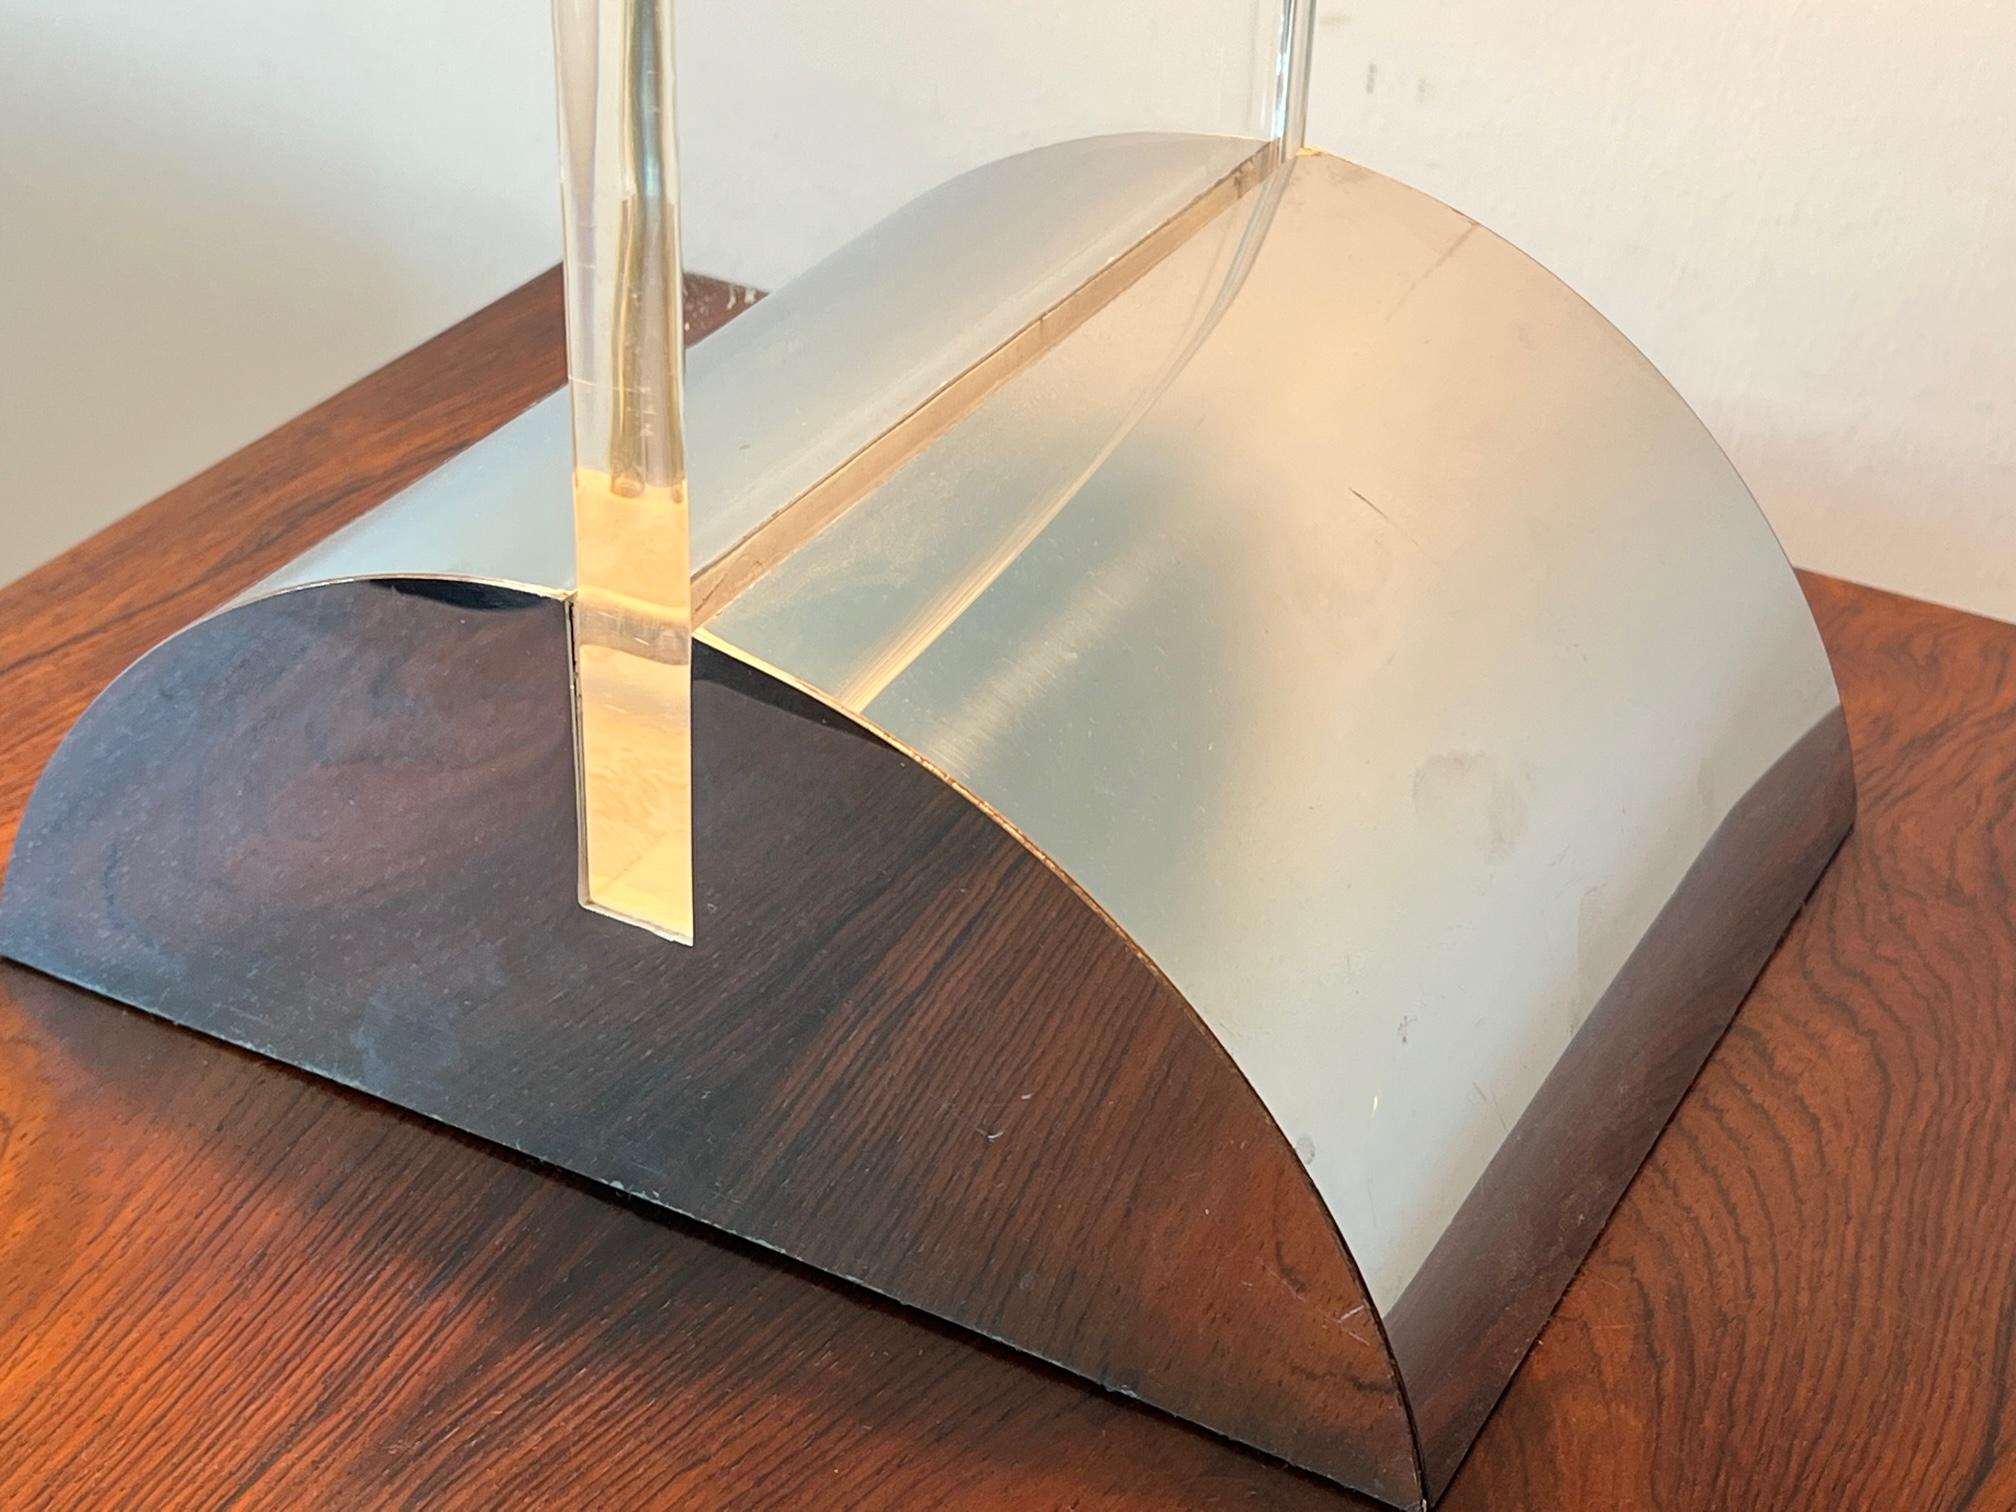 A real 1970's lucite and chrome table lamp by George Kovacs. Large scale at 26